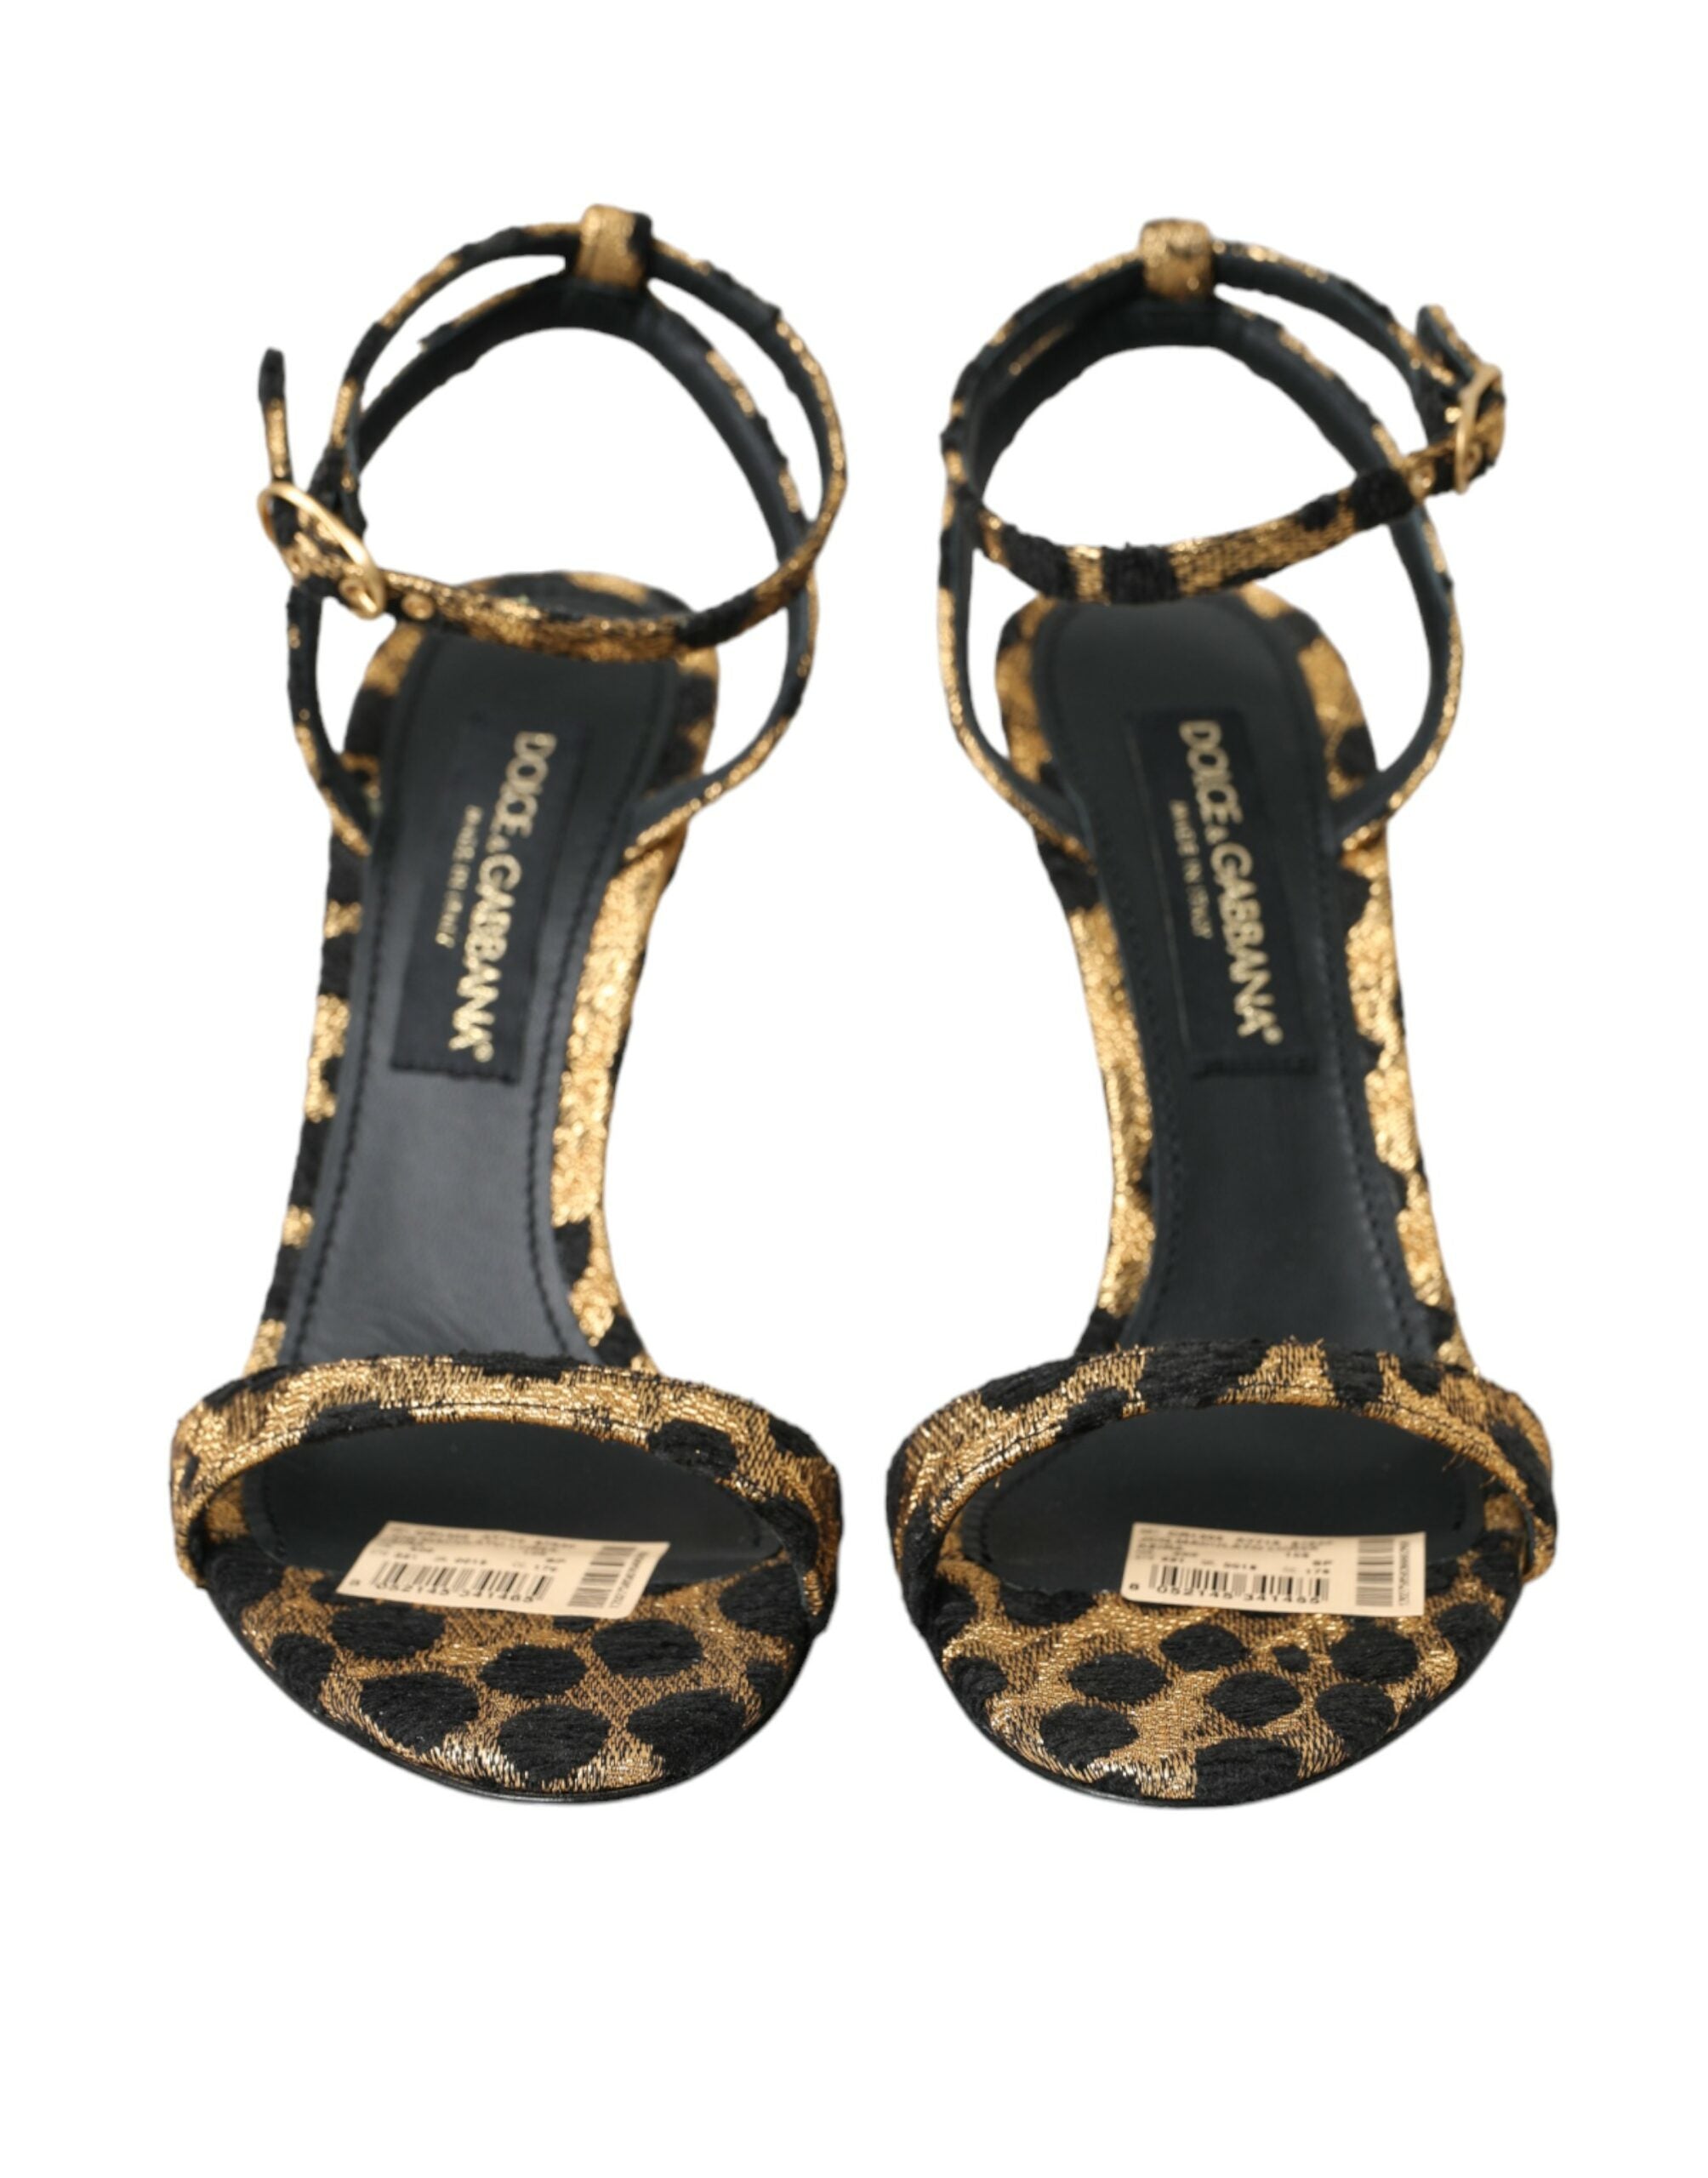 Gold Leopard Crystals Heels Sandals Shoes - Divitiae Glamour